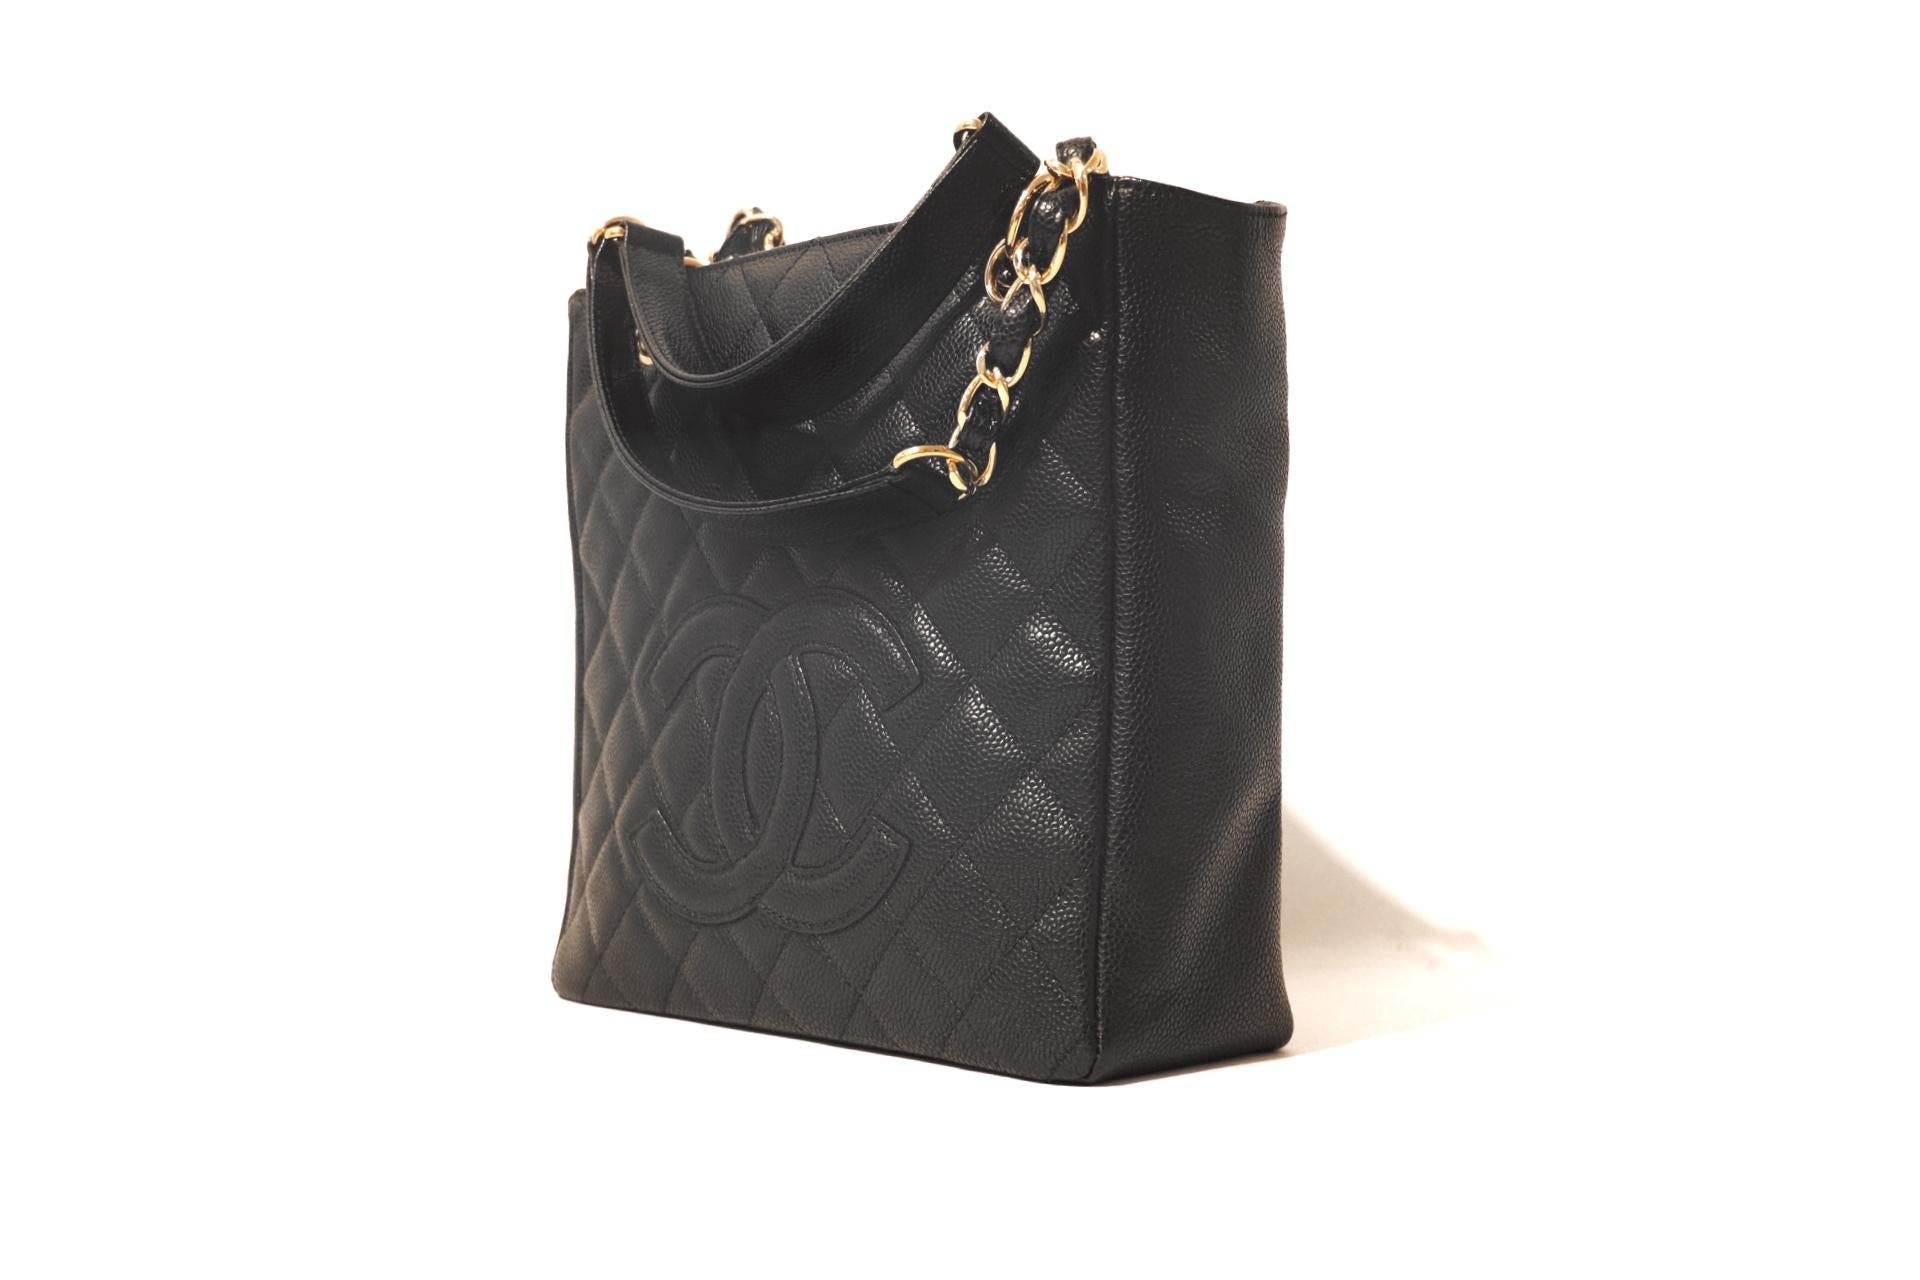 This authentic Chanel Black Caviar Leather PST is in excellent plus condition.  Part of the Timeless Classics, the Petite Shopping Tote is the perfect companion for everyday enjoyment. 
Black caviar leather is durable and textured.  Quilted in